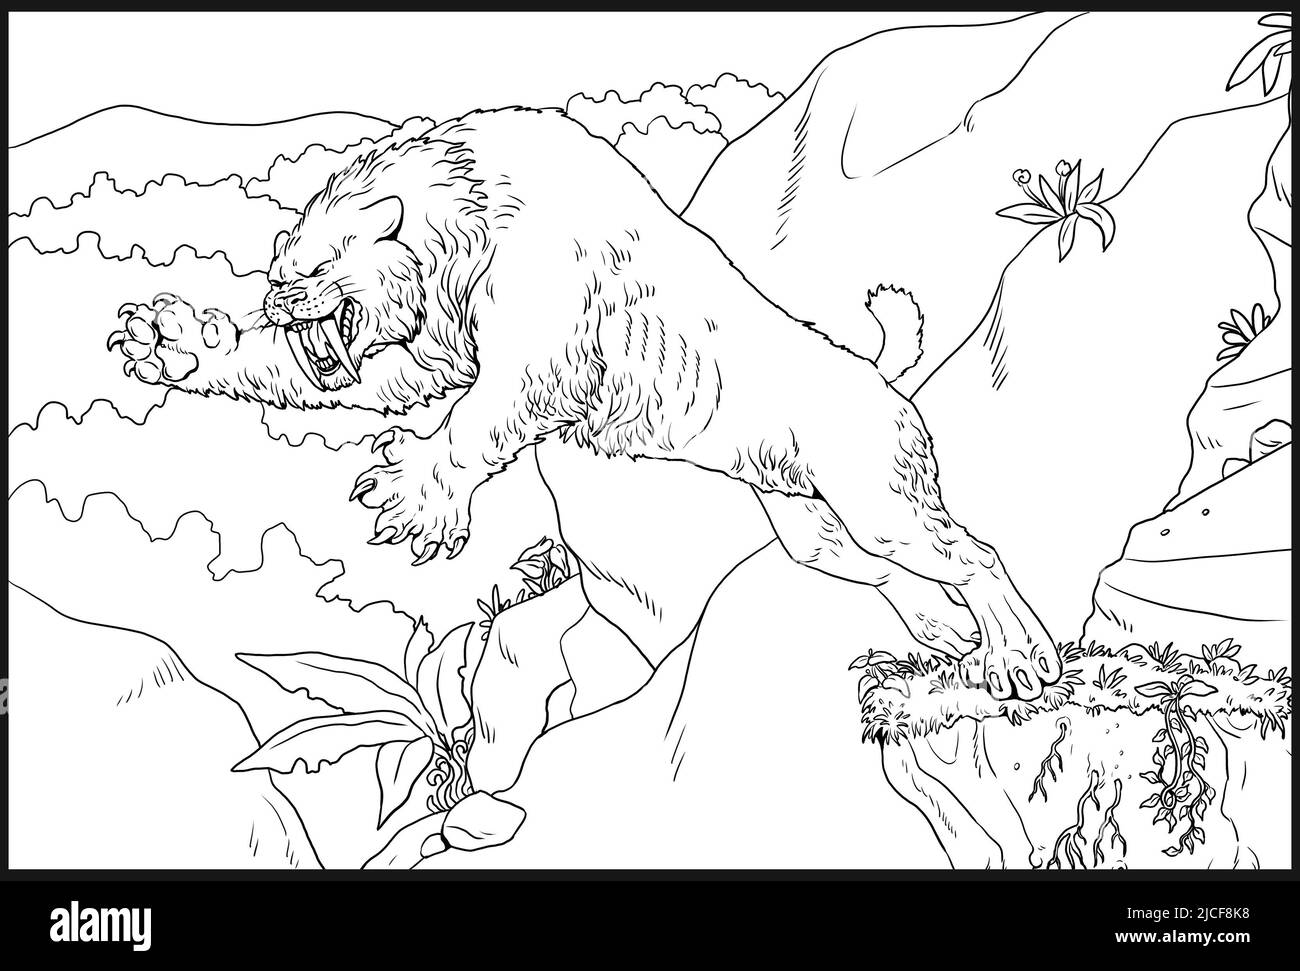 Sabre tooth tiger baby  Drawing by MuhammadHC  DrawingNow